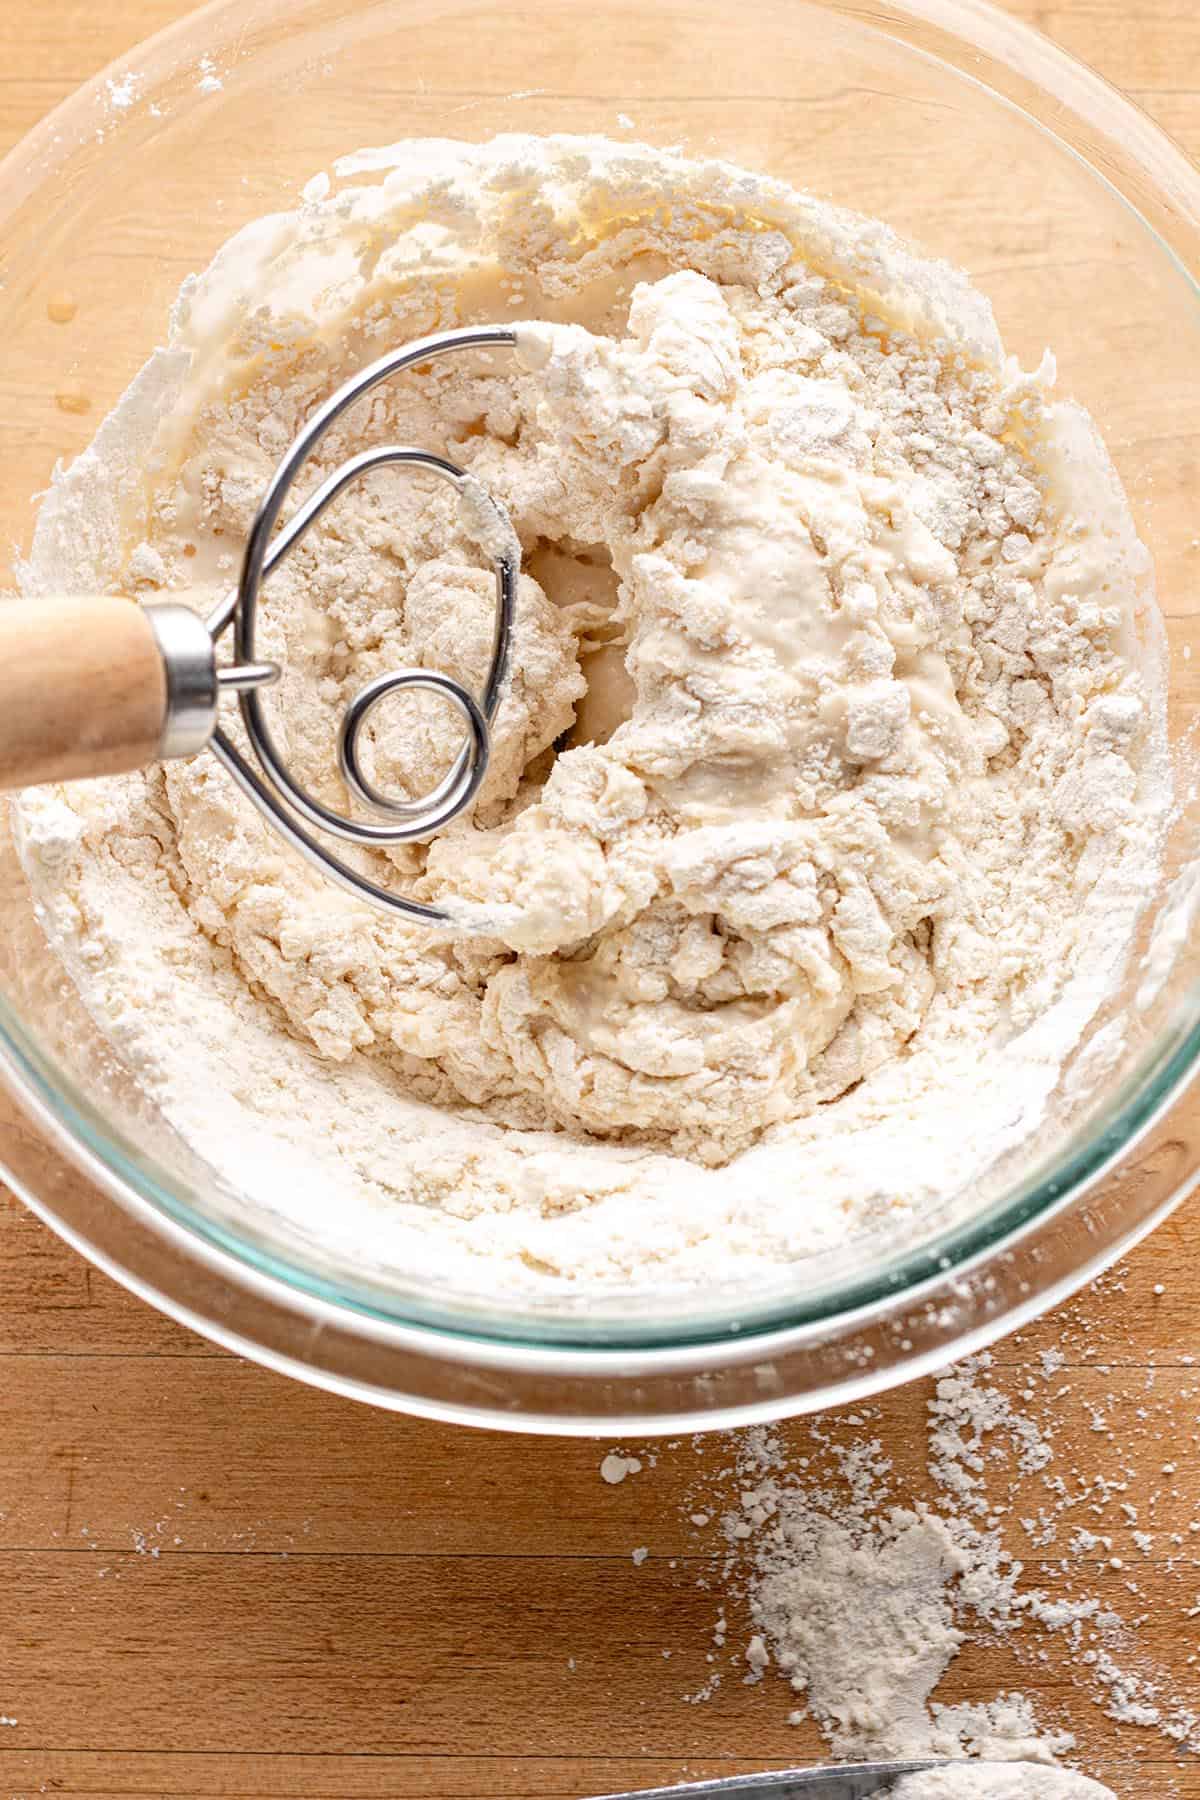 A glass bowl with a danish dough whisk mixing up a sourdough starter.